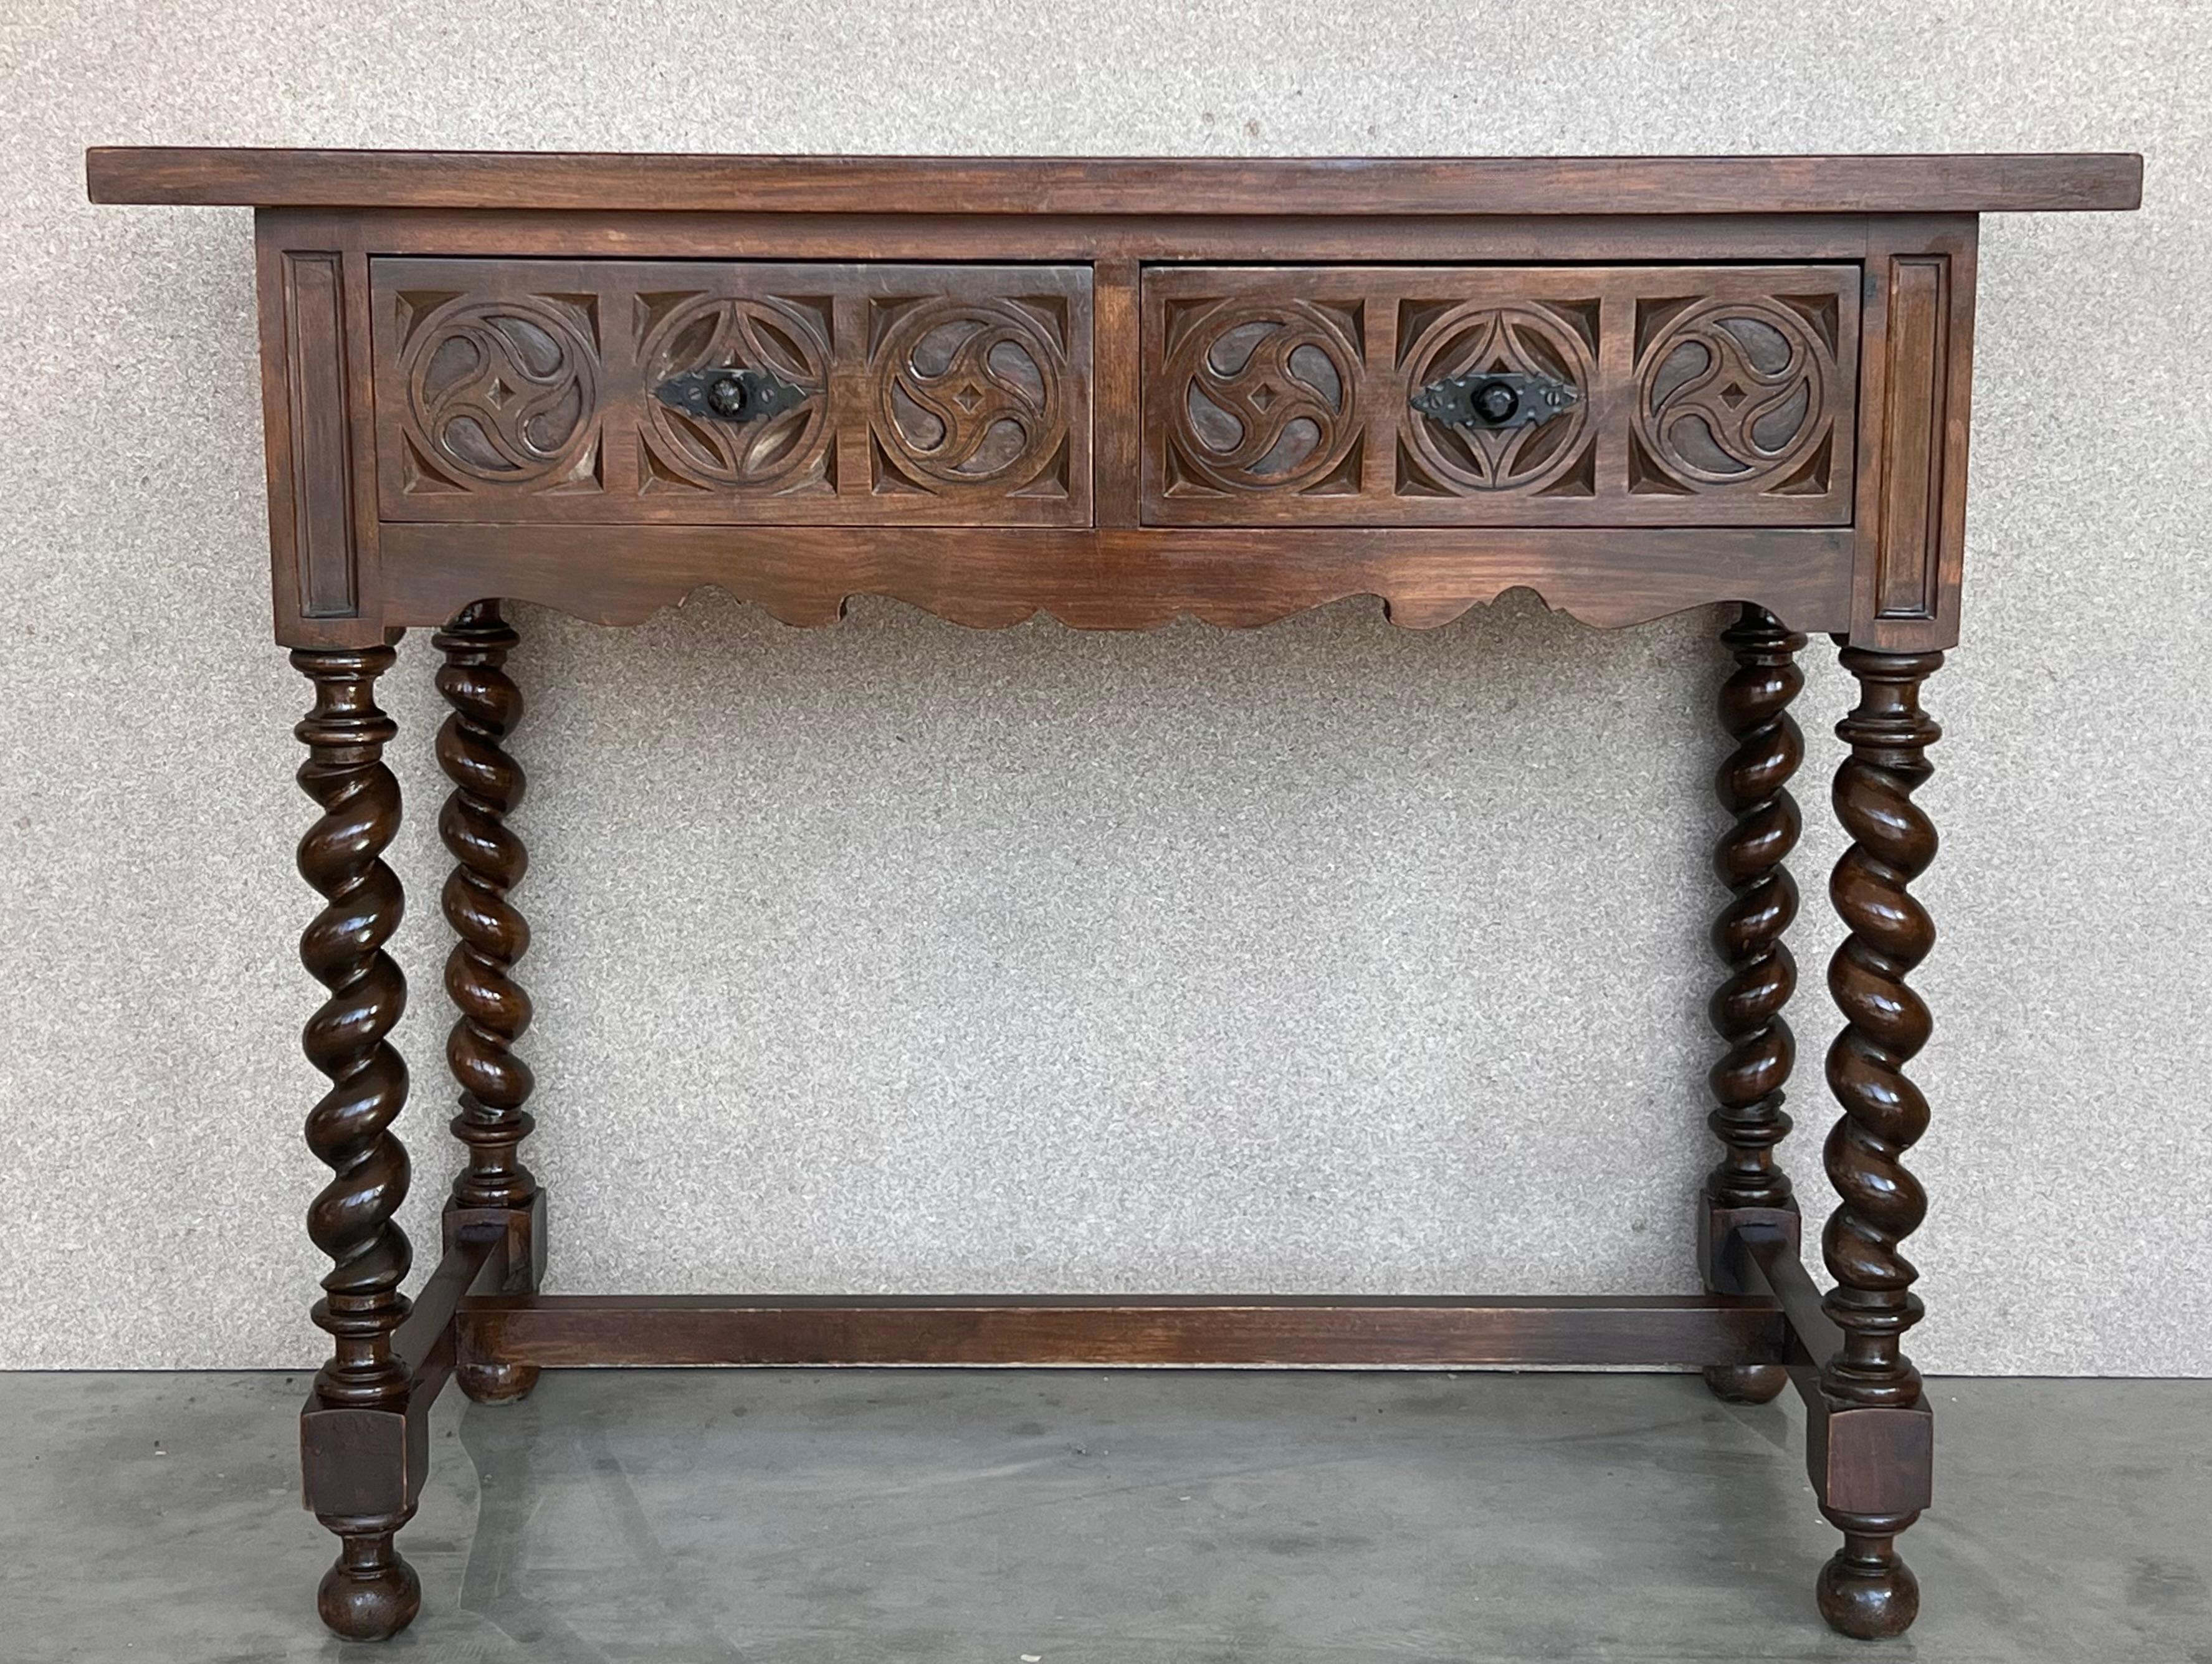 Early 20th century carved Spanish console with turned legs and a drawer with hardware

This table with character is of rare narrow depth. It is characteristic of Spanish Baroque furniture with a thick one-piece top, a simple and bold chip-carved